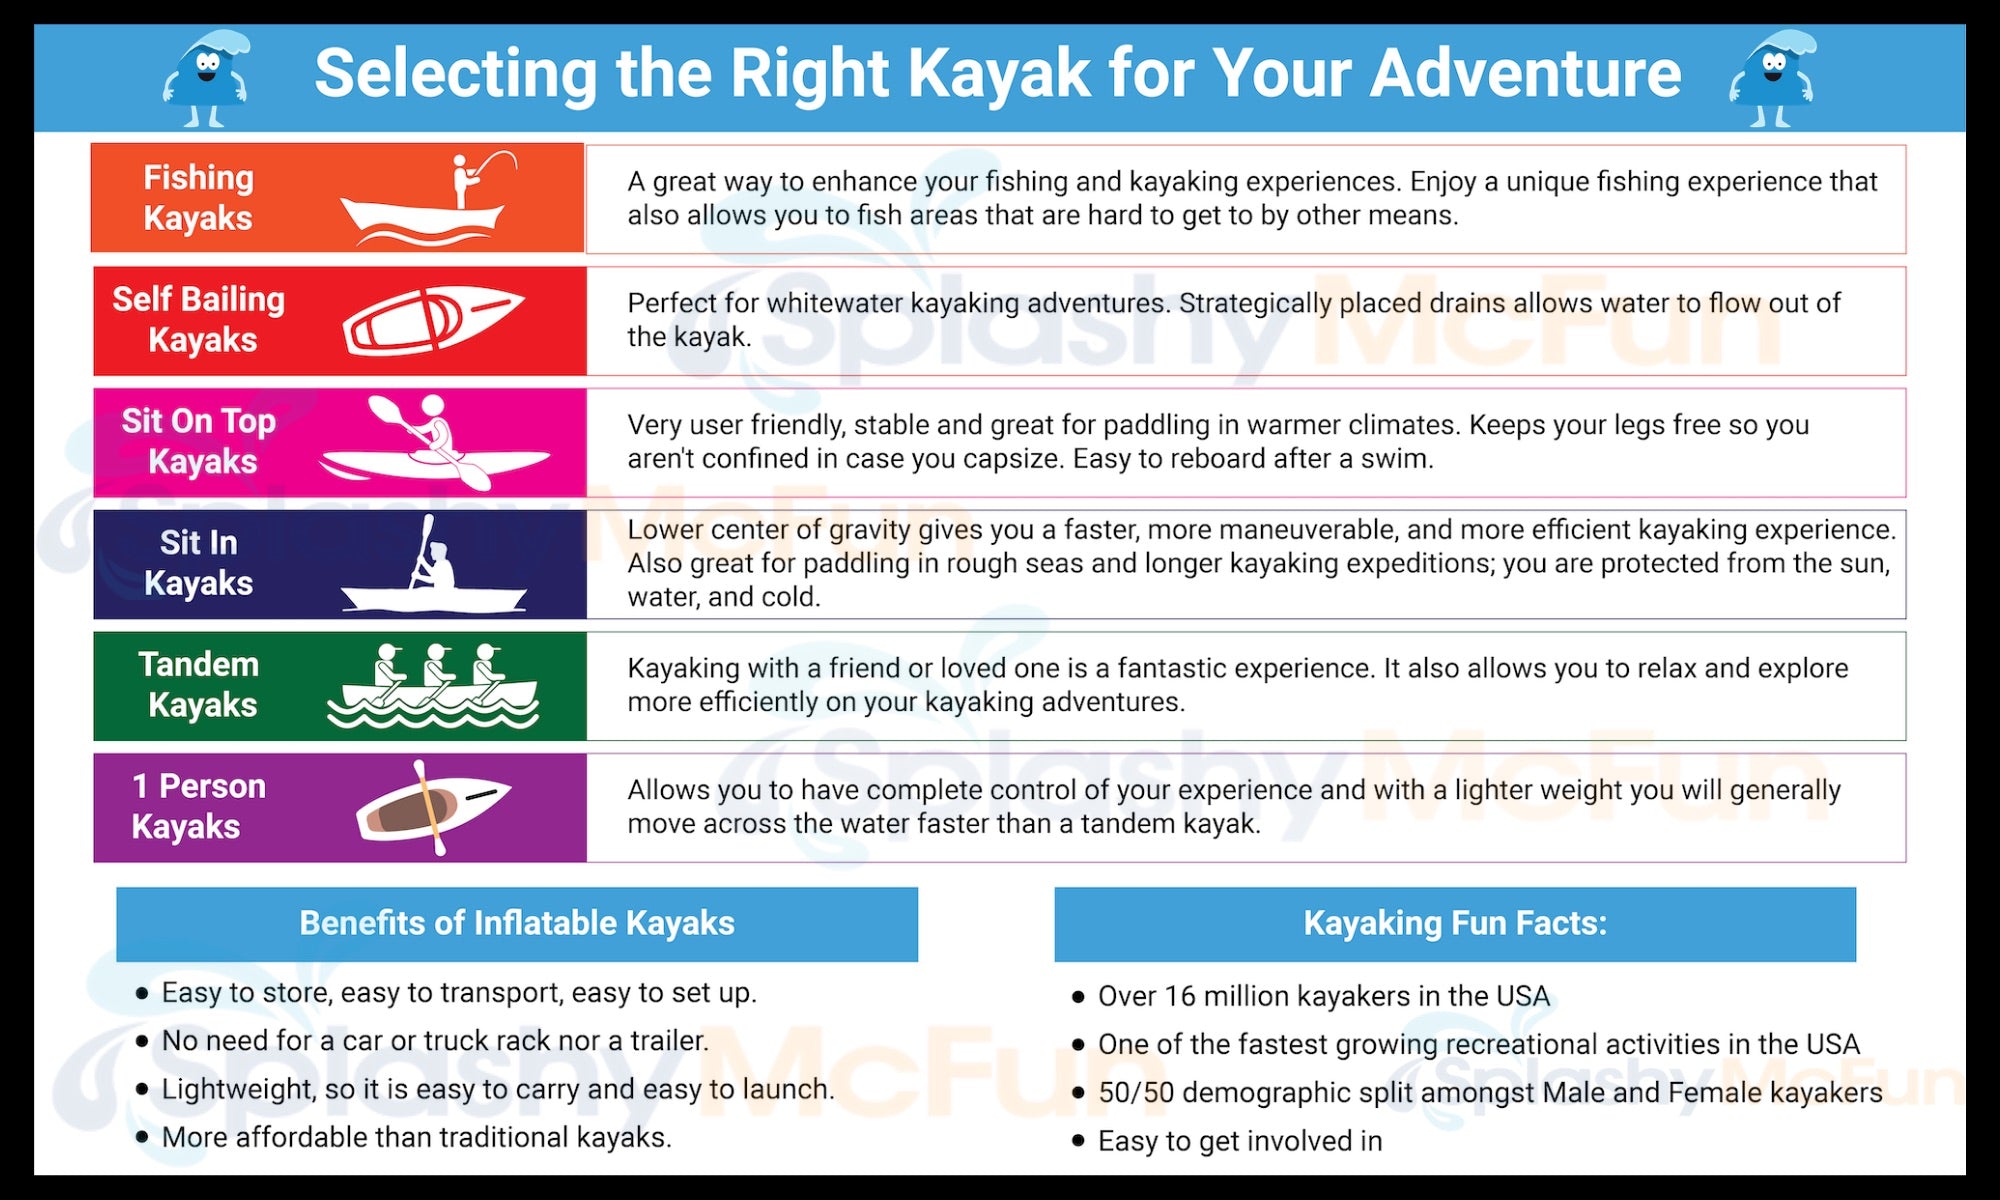 Types of inflatable kayaks that you have to choose from:  Inflatable Fishing Kayak, Whitewater kayak, Sit on top kayak, sit in kayak, tandem kayak, and 1 person kayak.